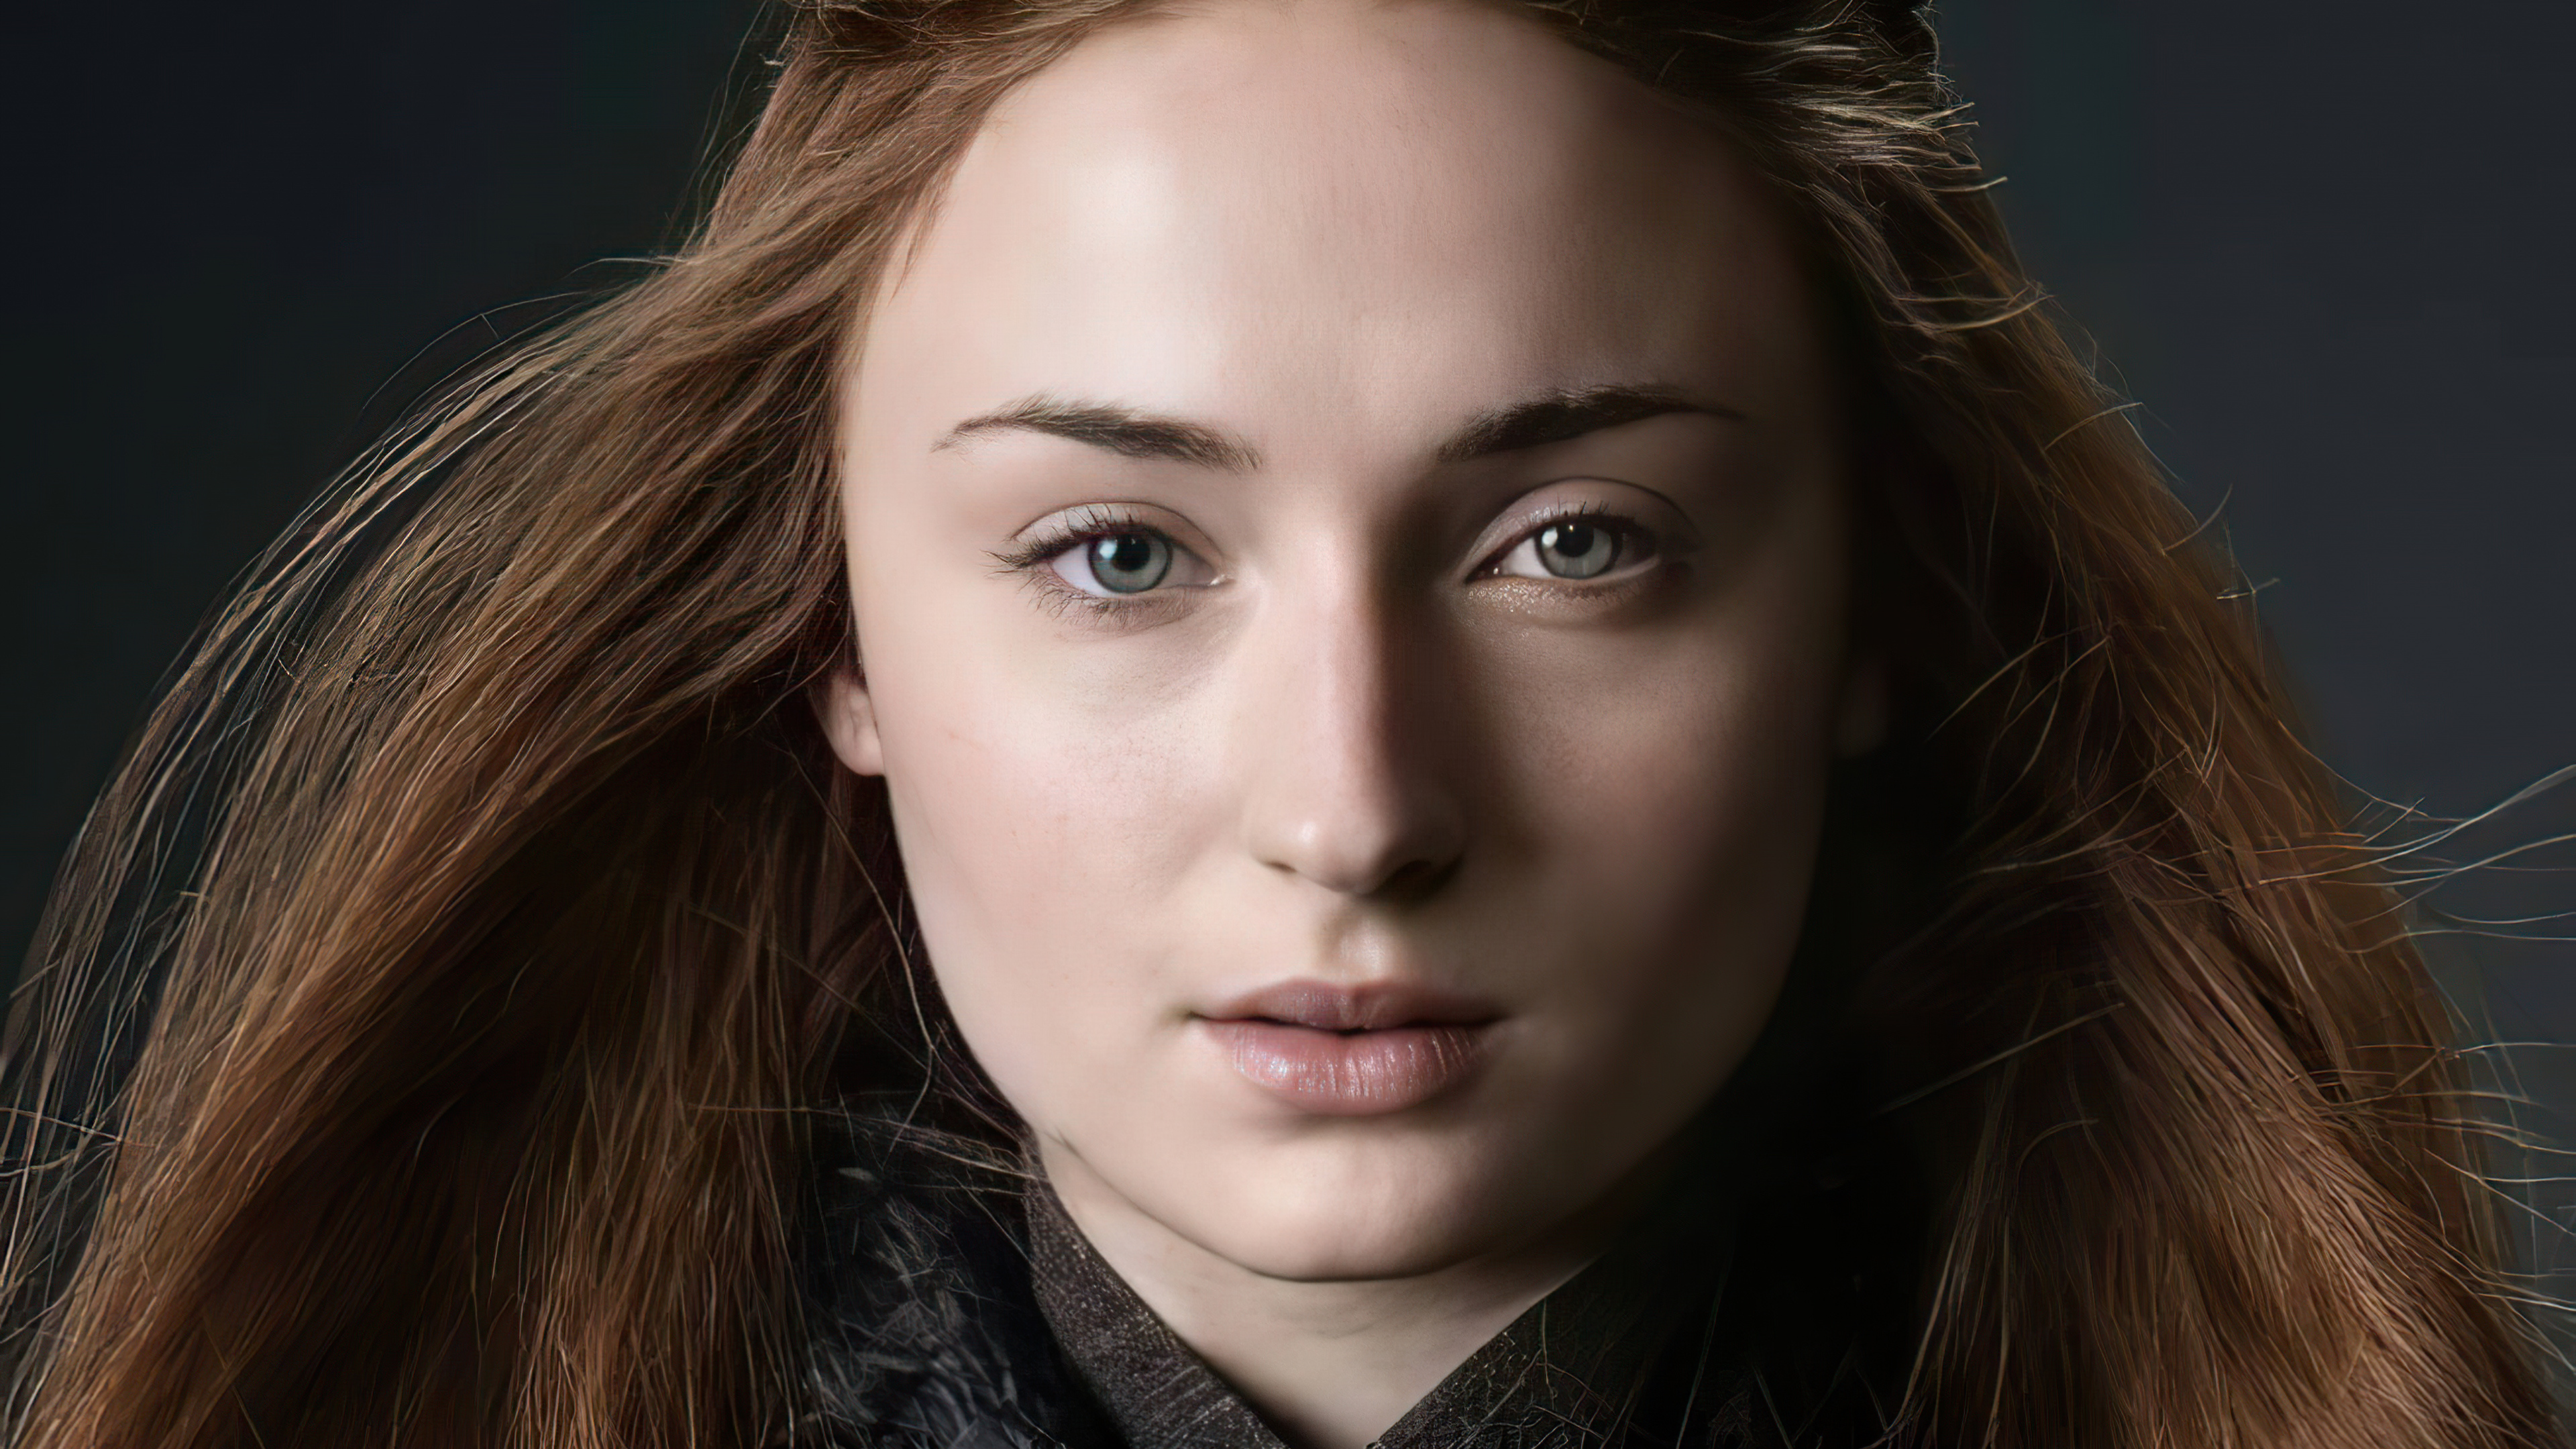 Sophie Turner: Made acting debut as Sansa Stark on the television series Game of Thrones. 3840x2160 4K Wallpaper.